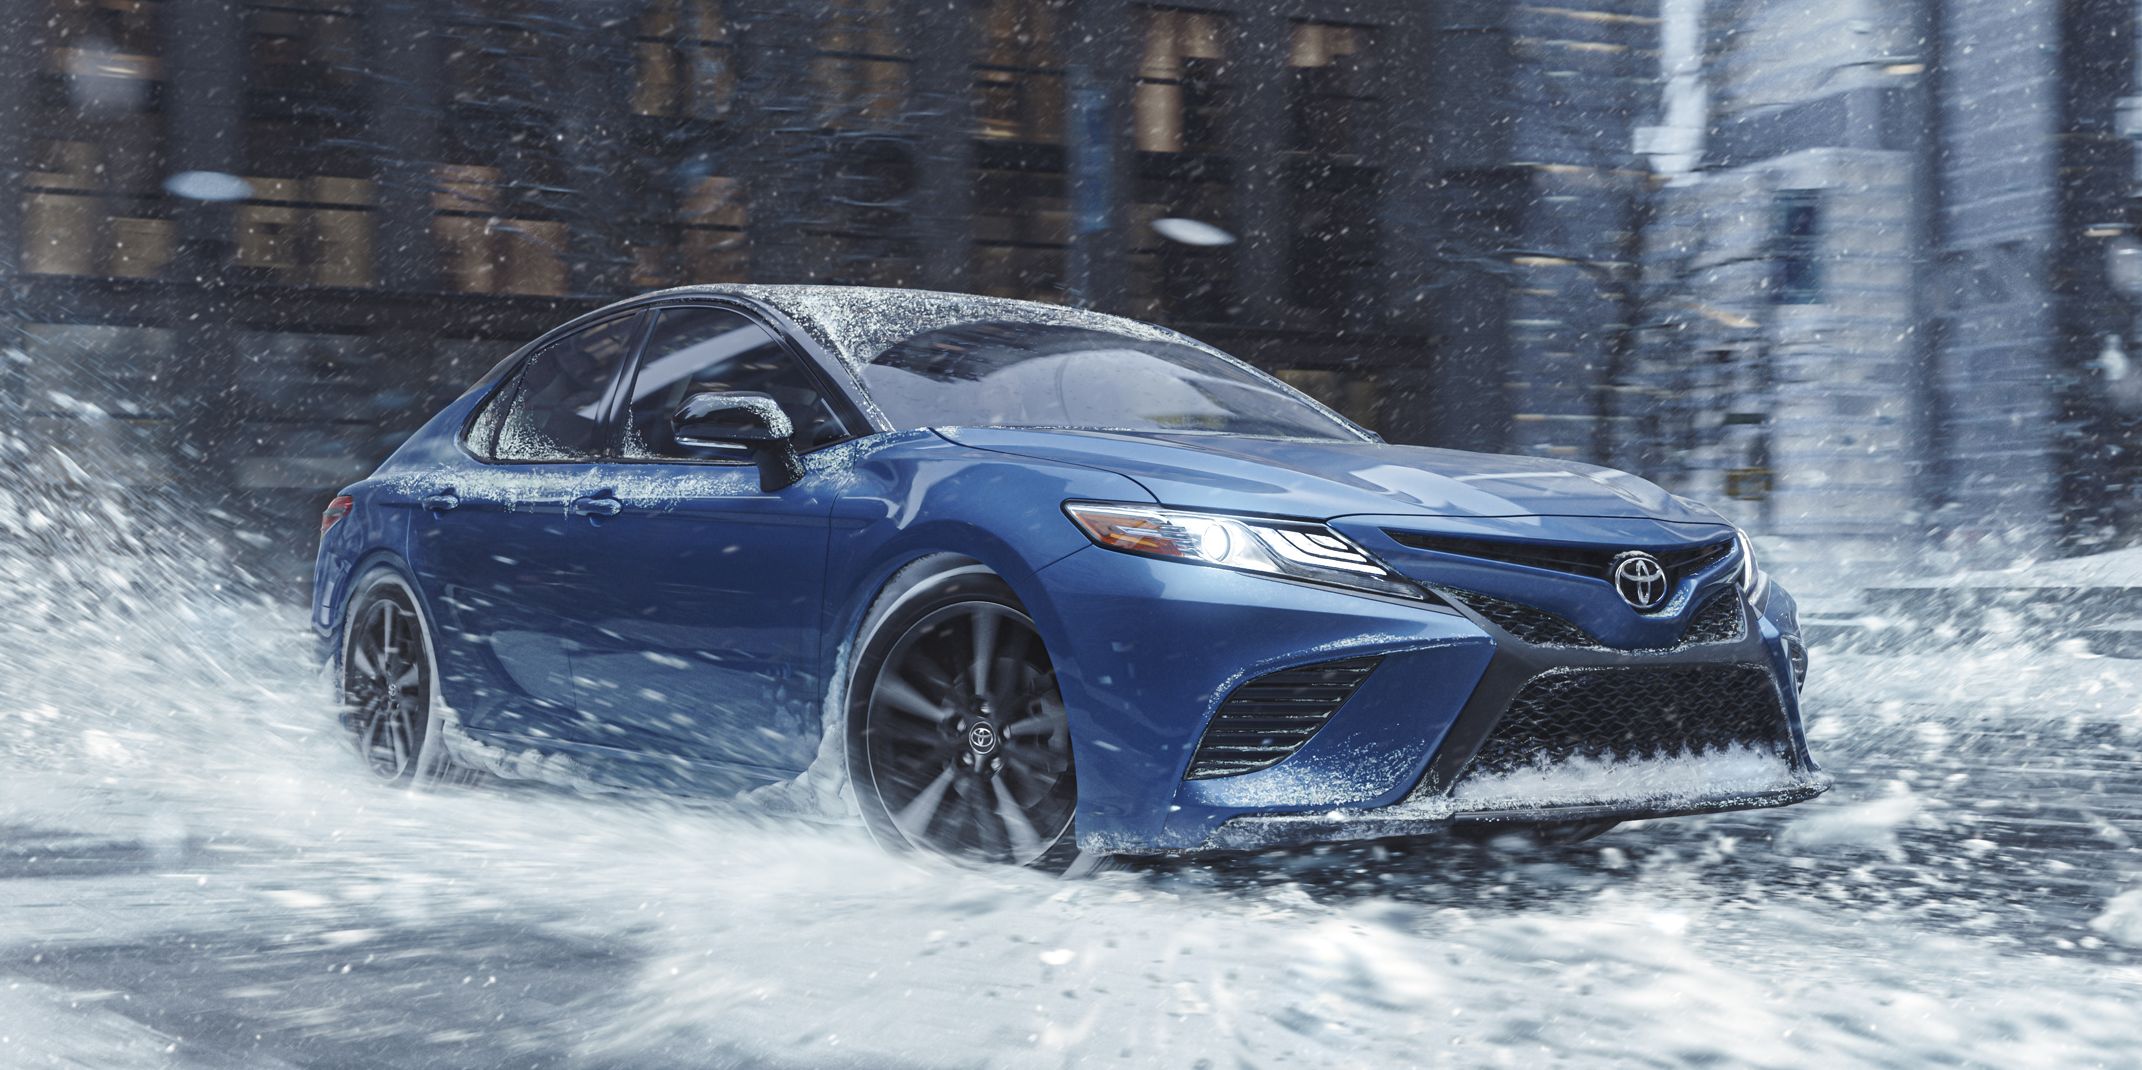 All-Wheel Drive on 2020 Toyota Camry Costs $1400 Extra